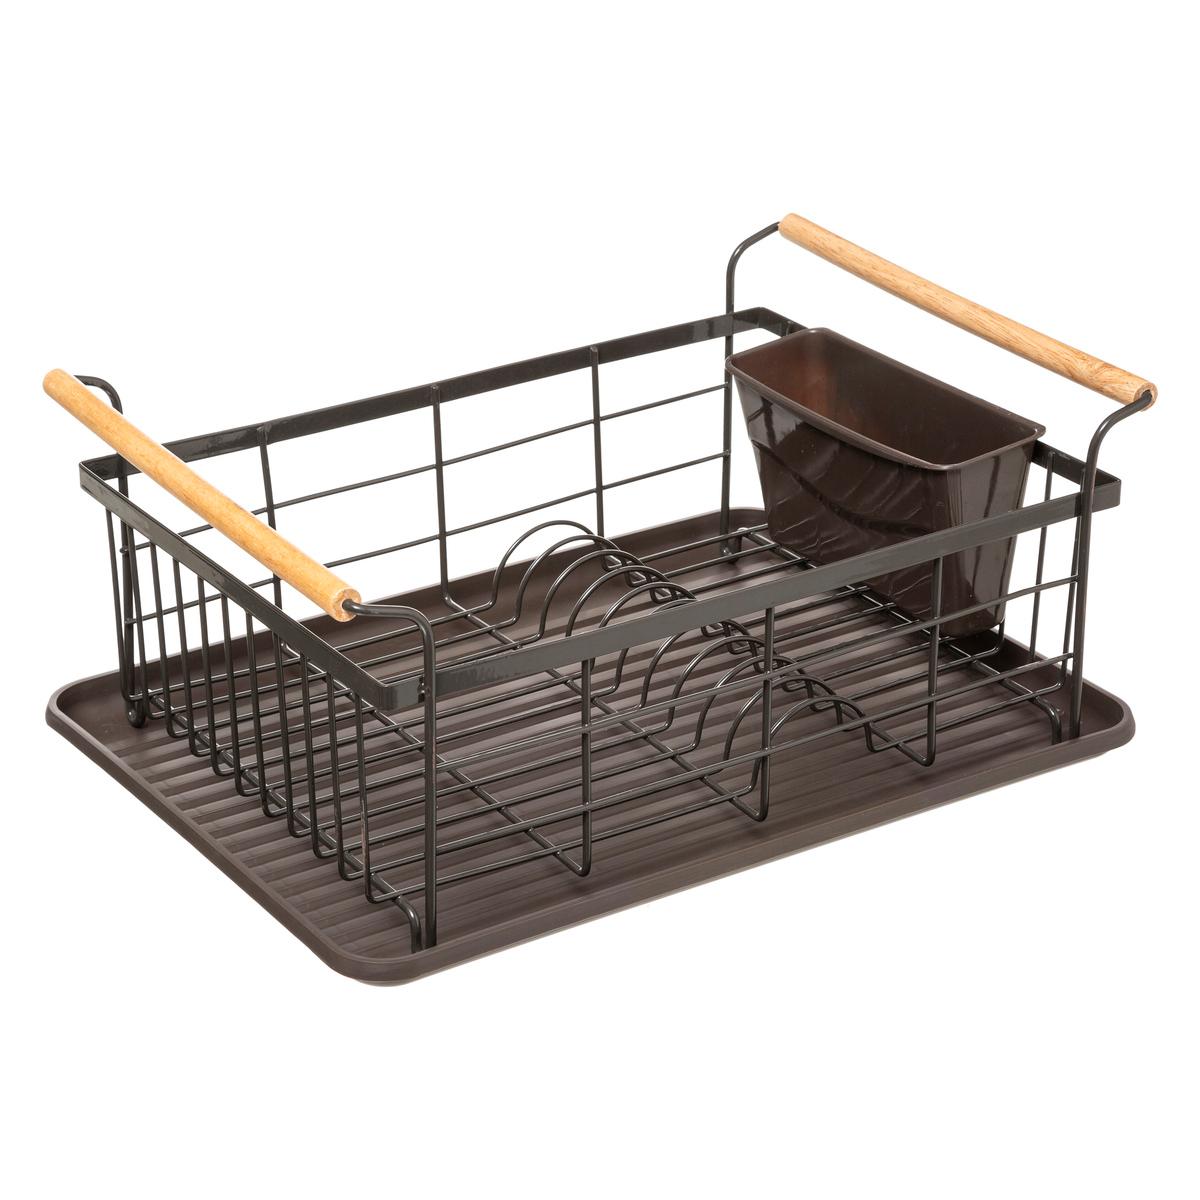 Stainless Steel Dish Drying Rack (White) – Brian&Dany